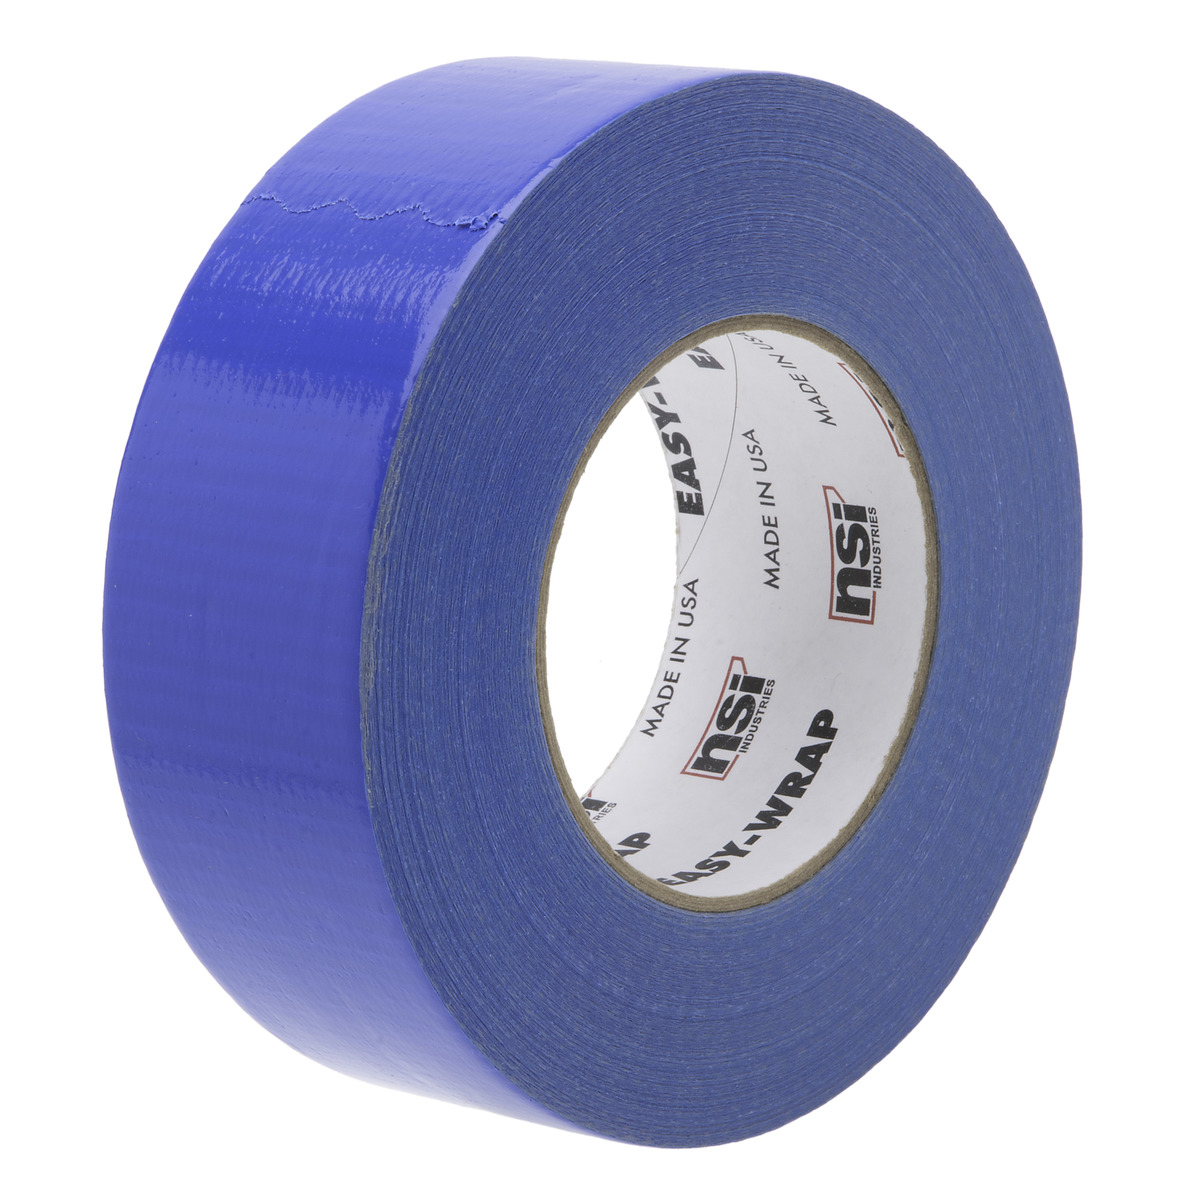 1 1/2 X 60 BLUE MASKING TAPE - Allied Industrial Supplies